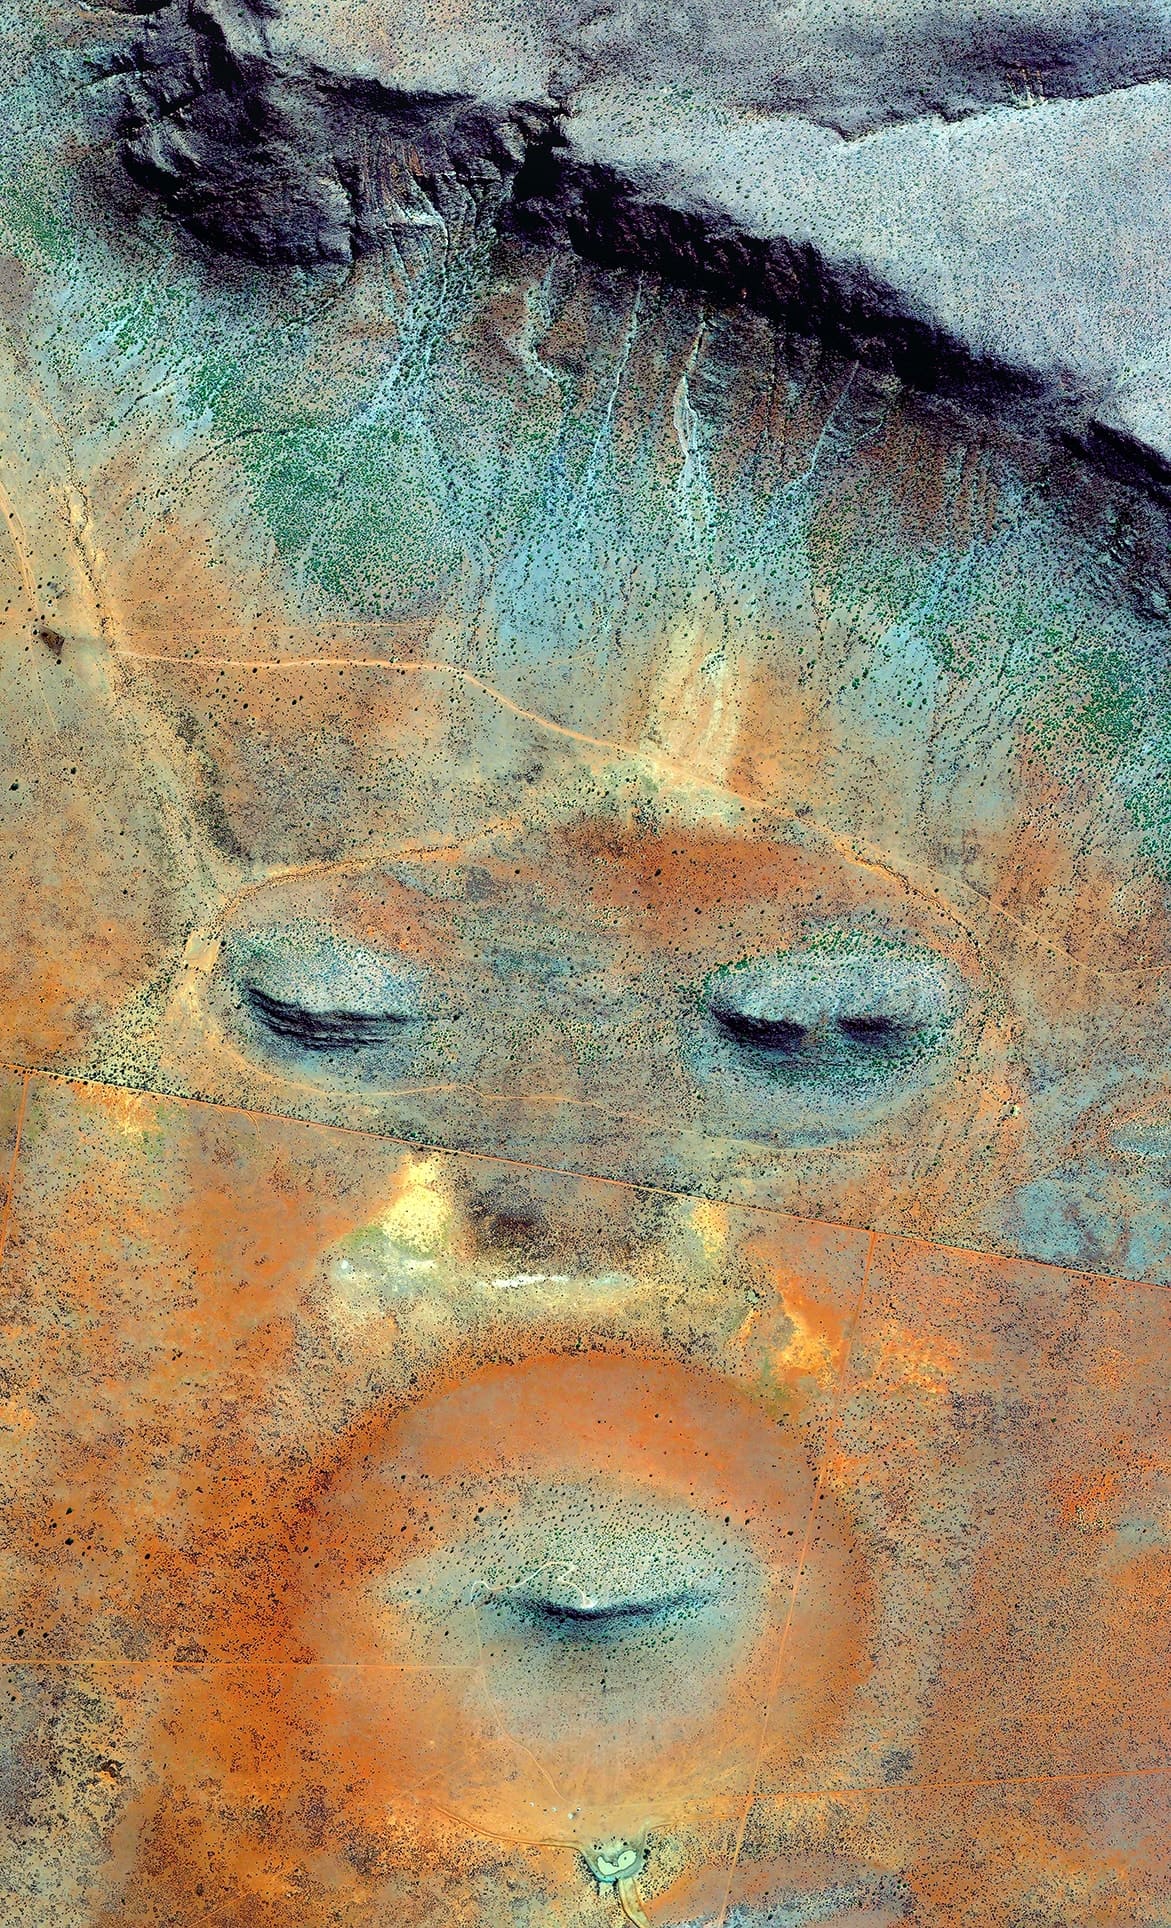 EARTH PORTRAIT 23 NAMIBIA, 2016, SATELLITE PHOTOGRAPHY, CM 130×80, limited edition 9